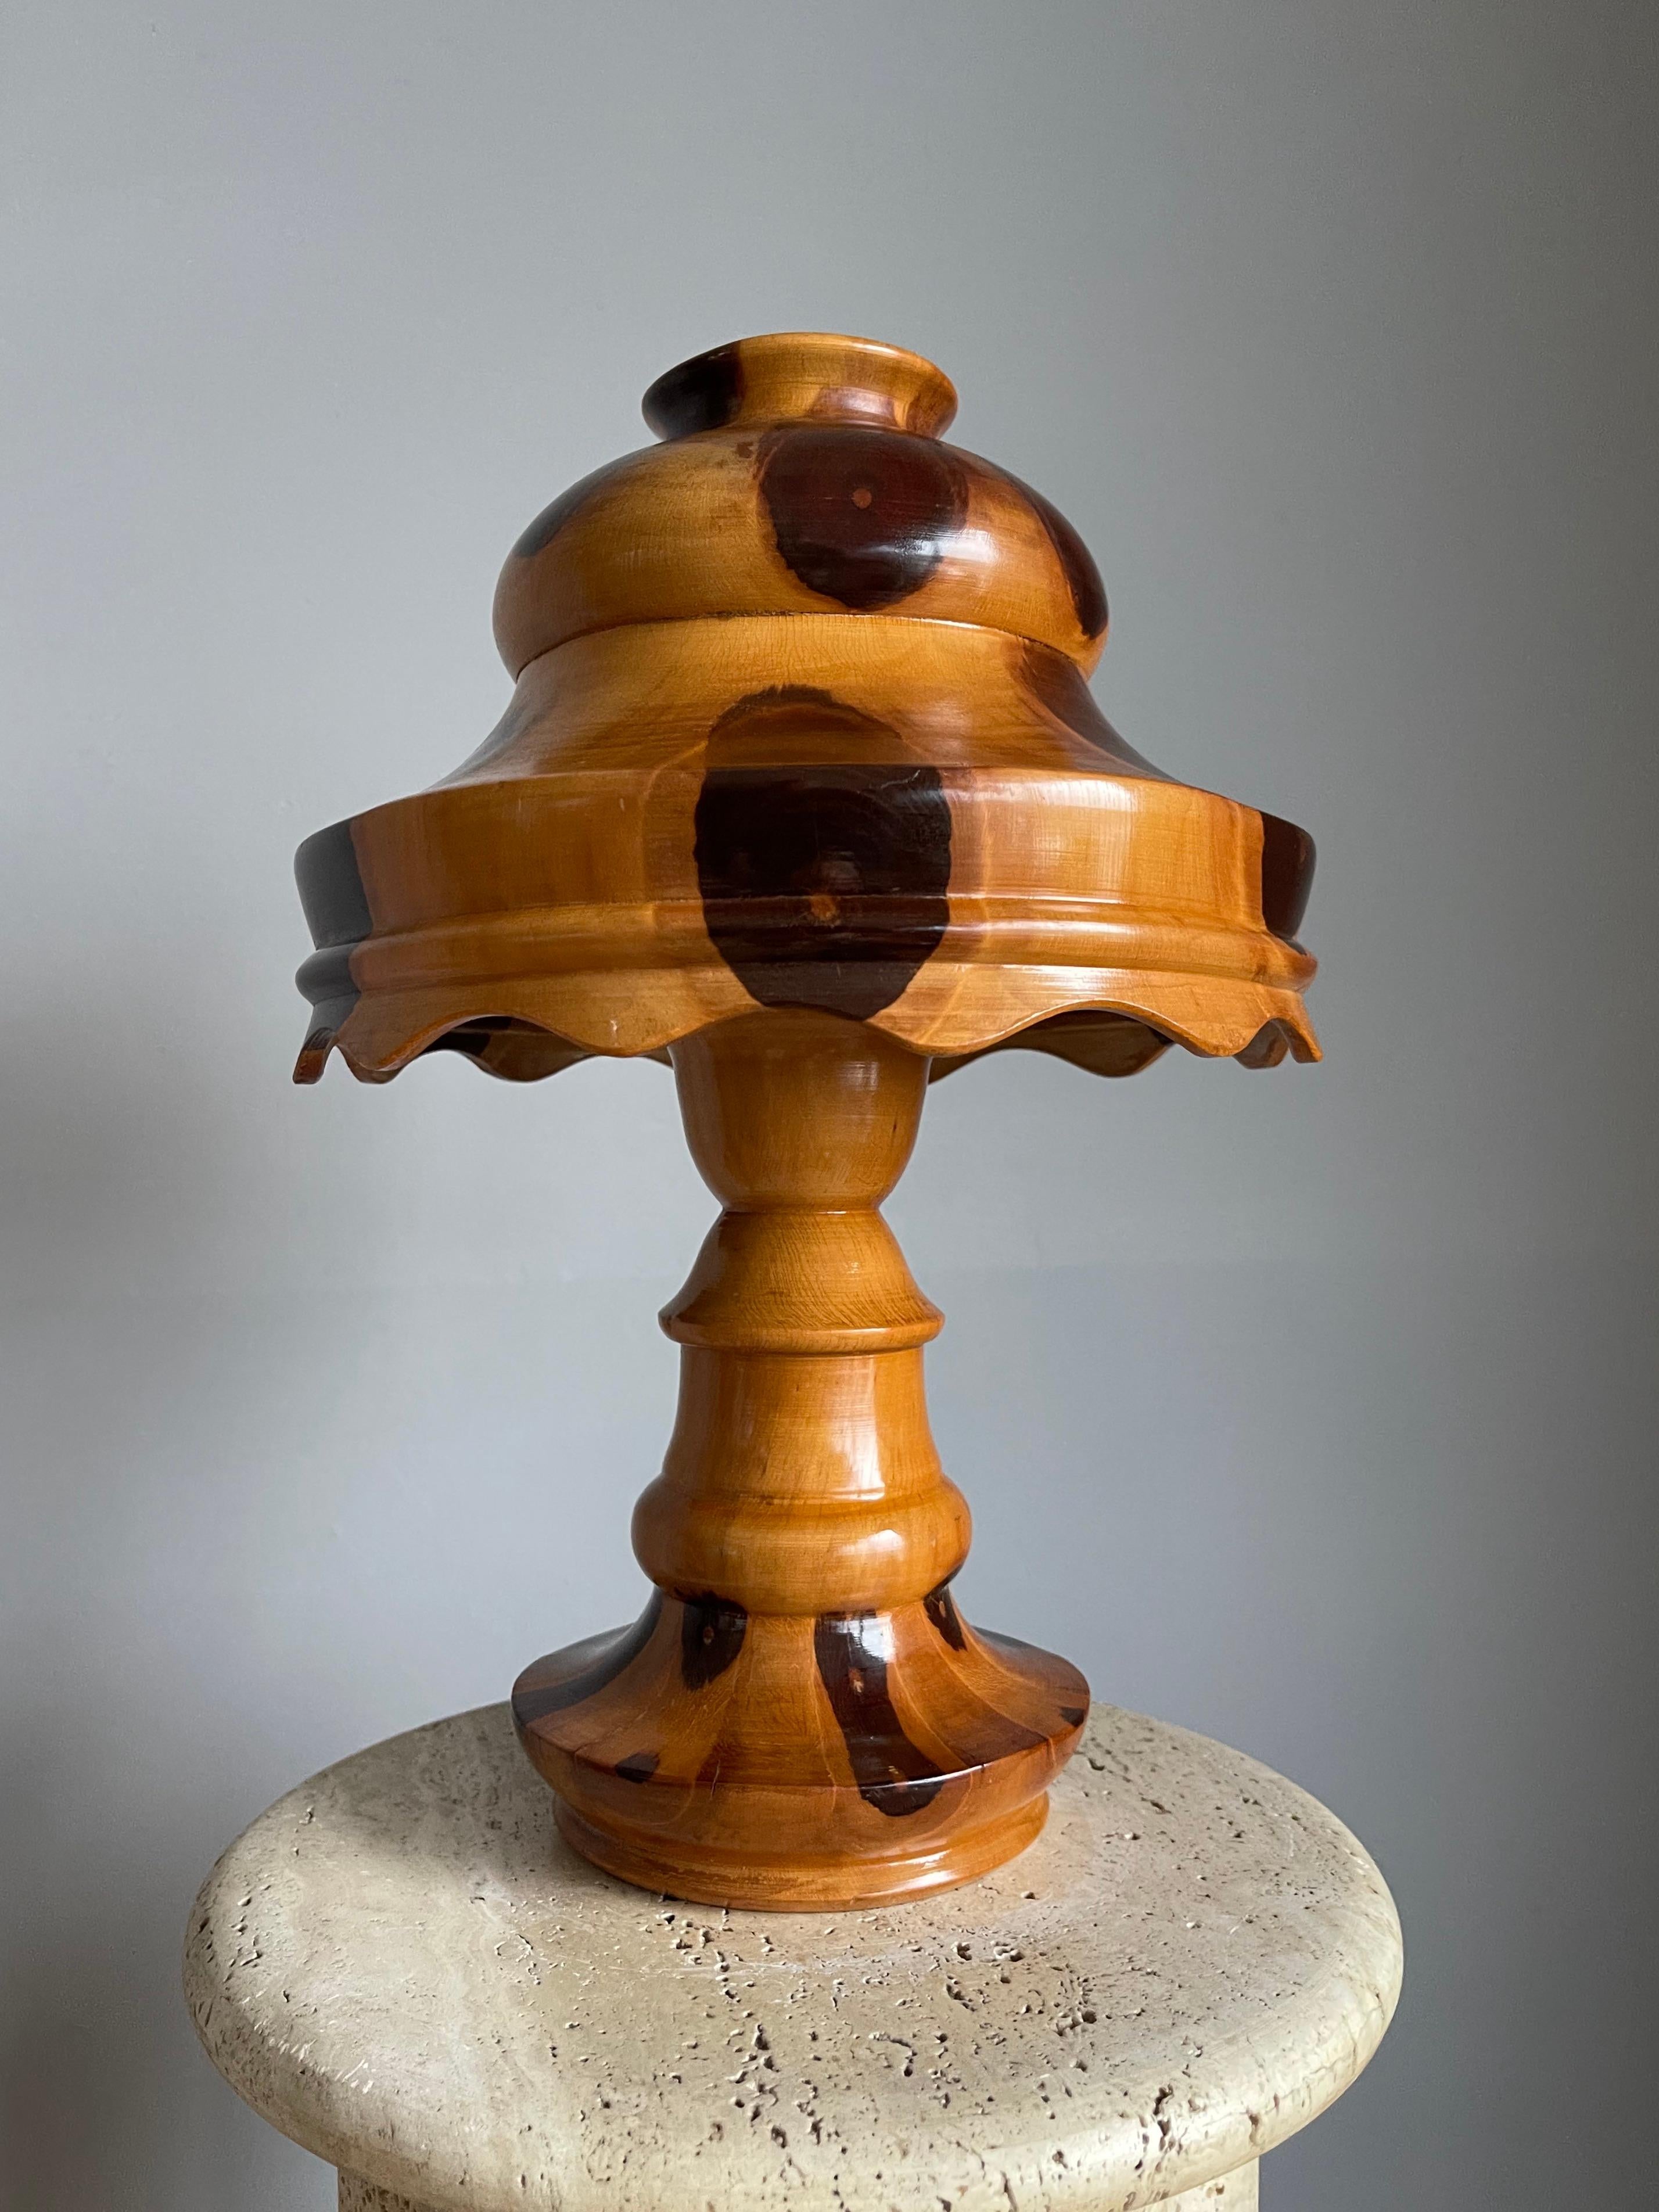 Hand-Crafted Mid-Century Modern Organic Table Desk Lamp Wood with Stunning Tree Knots Pattern